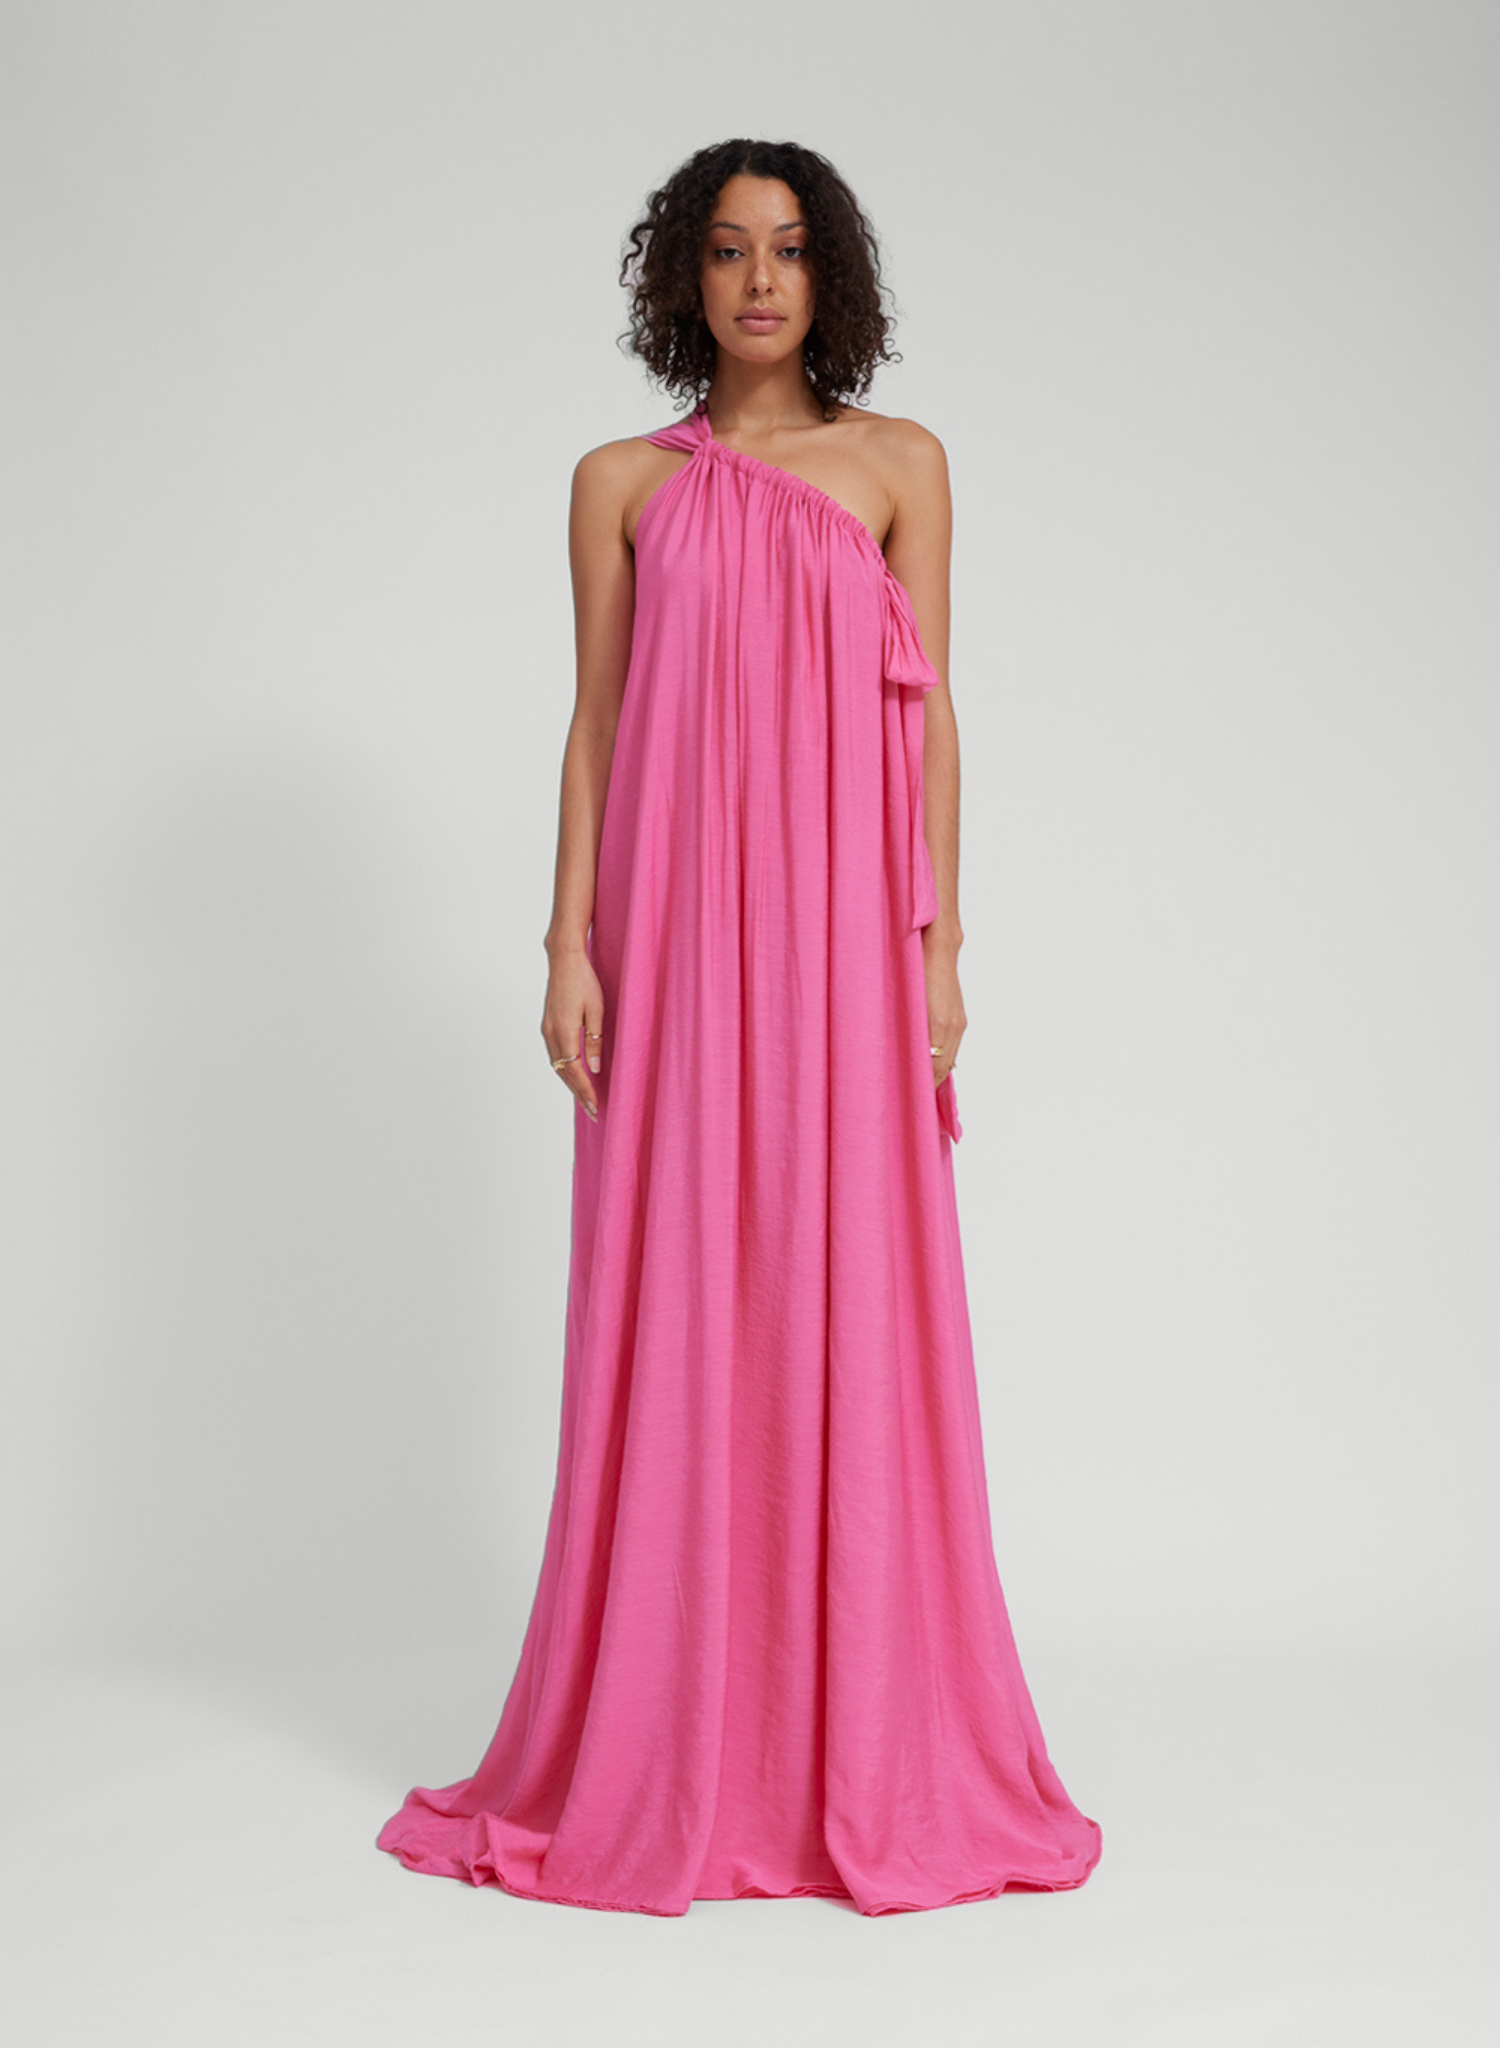 Floor length lightweight gown Adjustable strapping detail with ties Dress features 3 layers of main sheer fabric, to create pastel opaque appearance. Low back Fit adjustability through halter and shoulder strapping